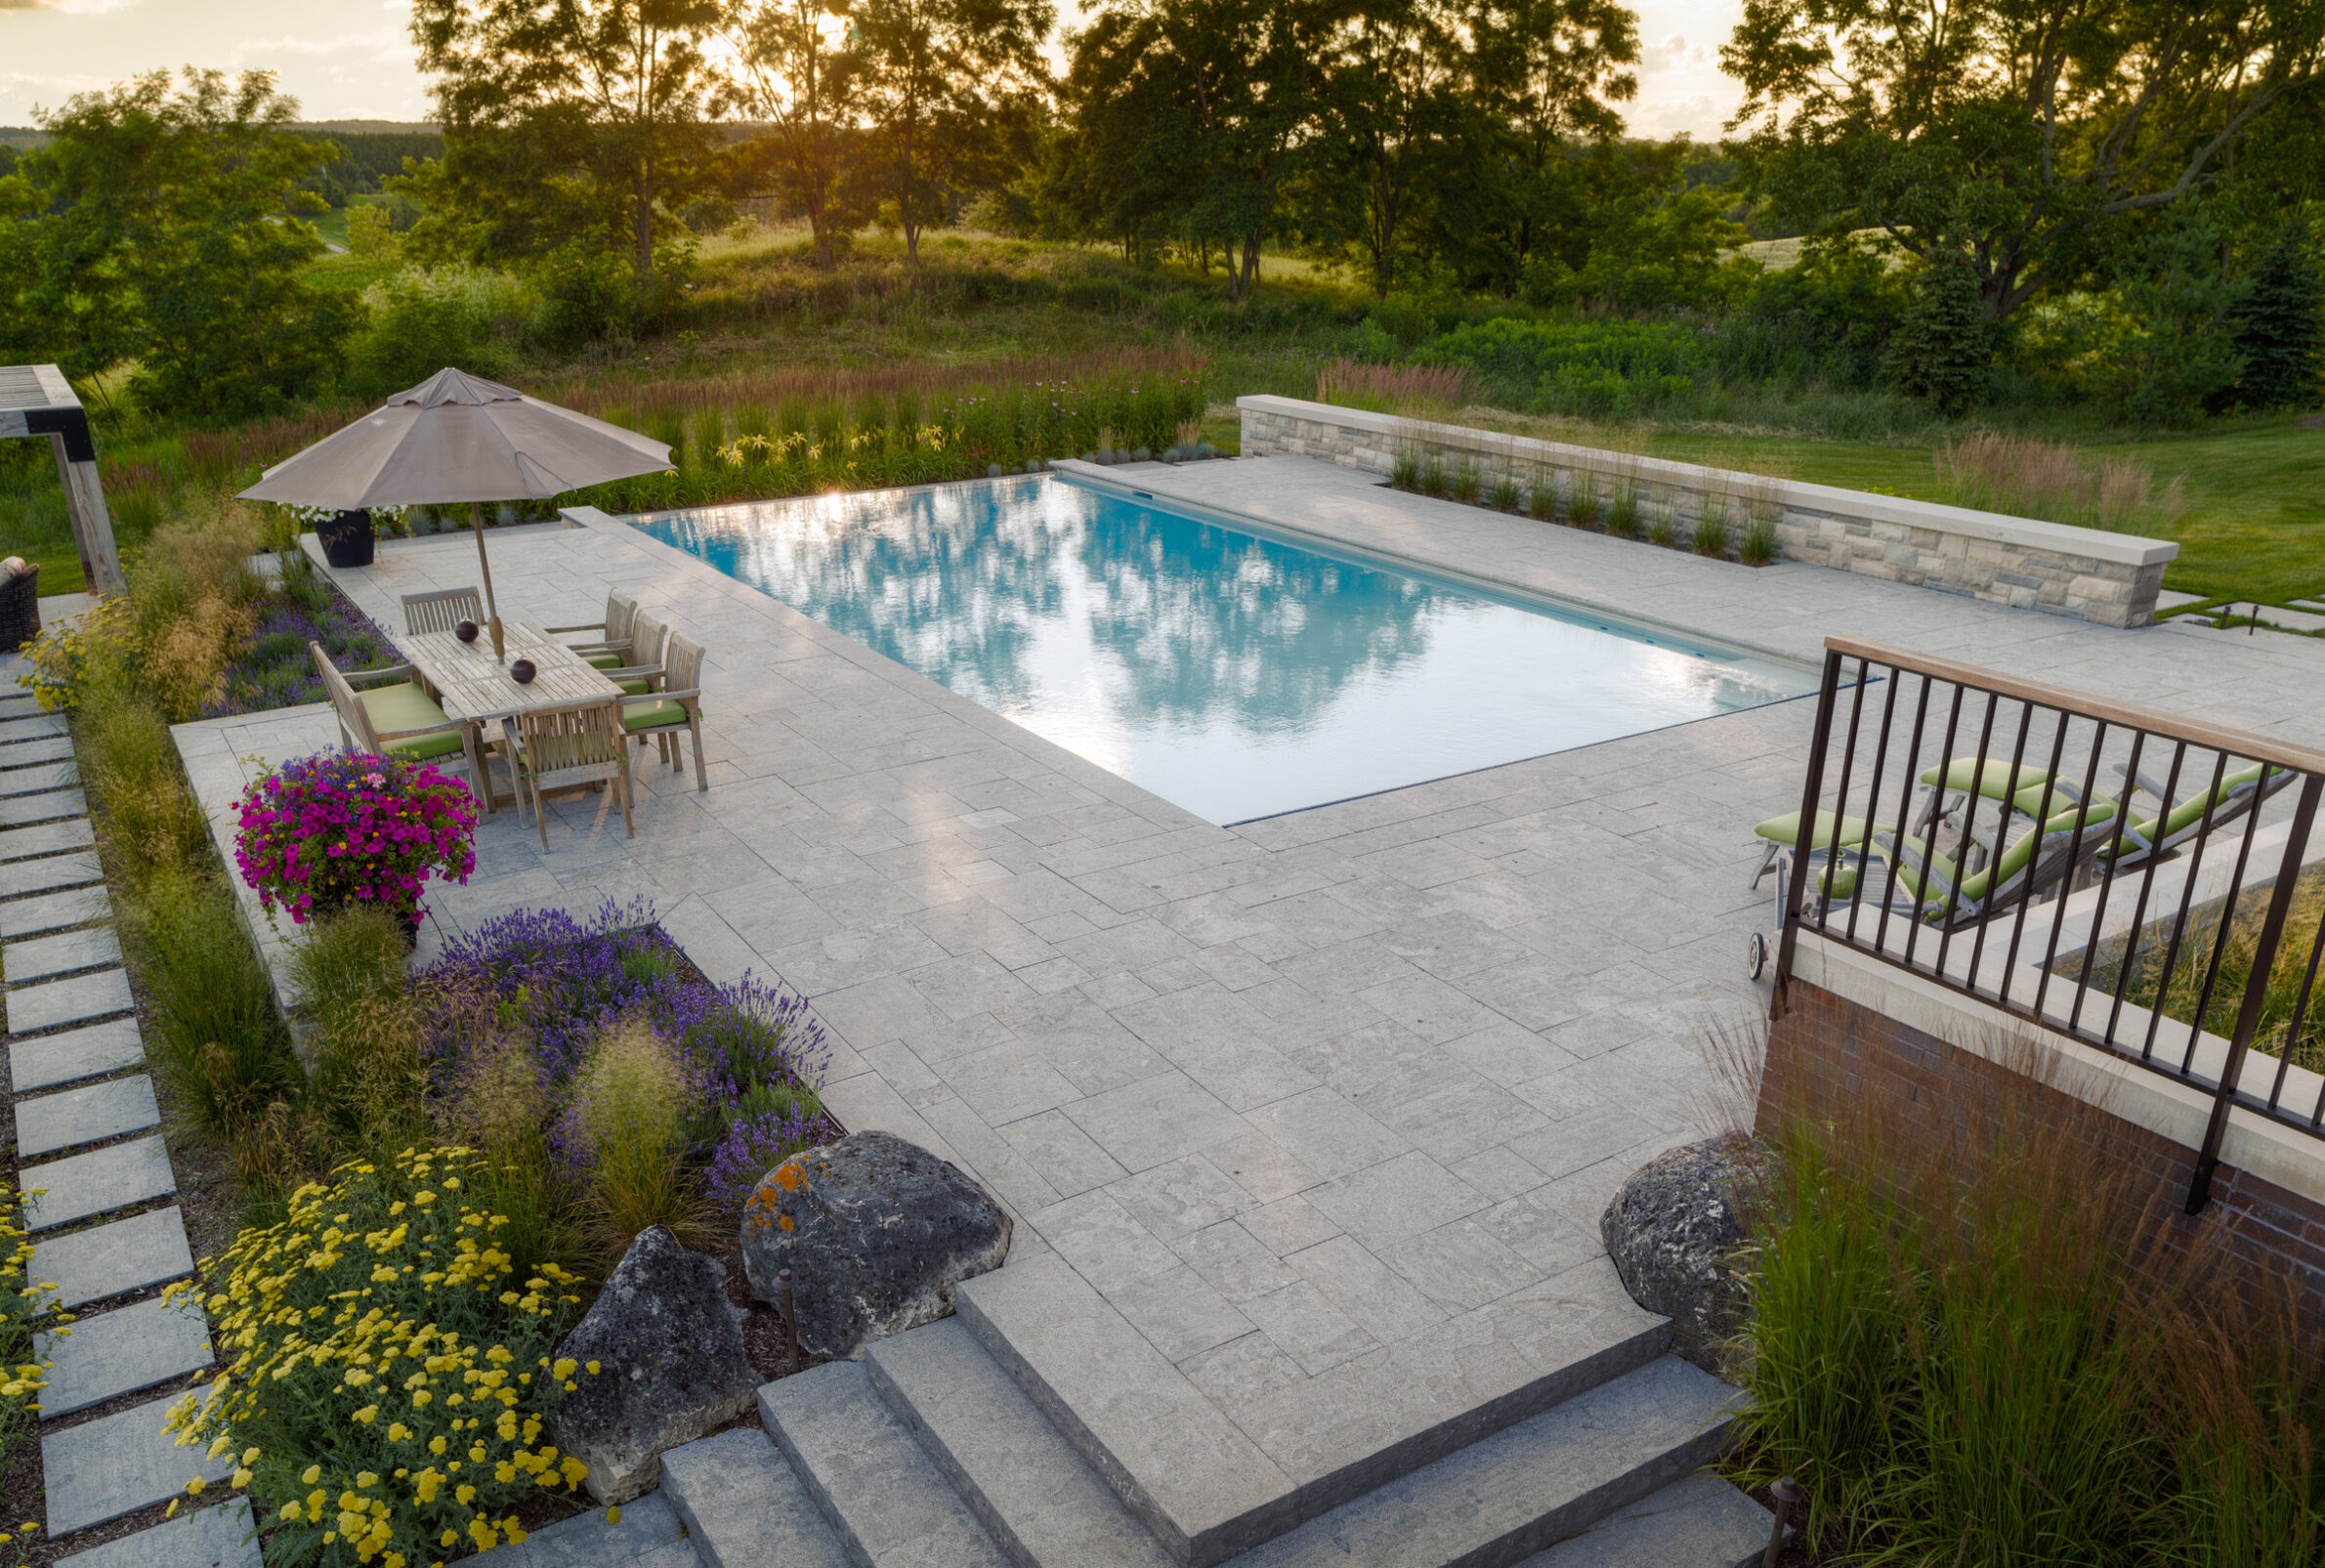 This is an image of a serene backyard with a rectangular swimming pool, outdoor furniture under an umbrella, stone paving, and colorful landscaping.